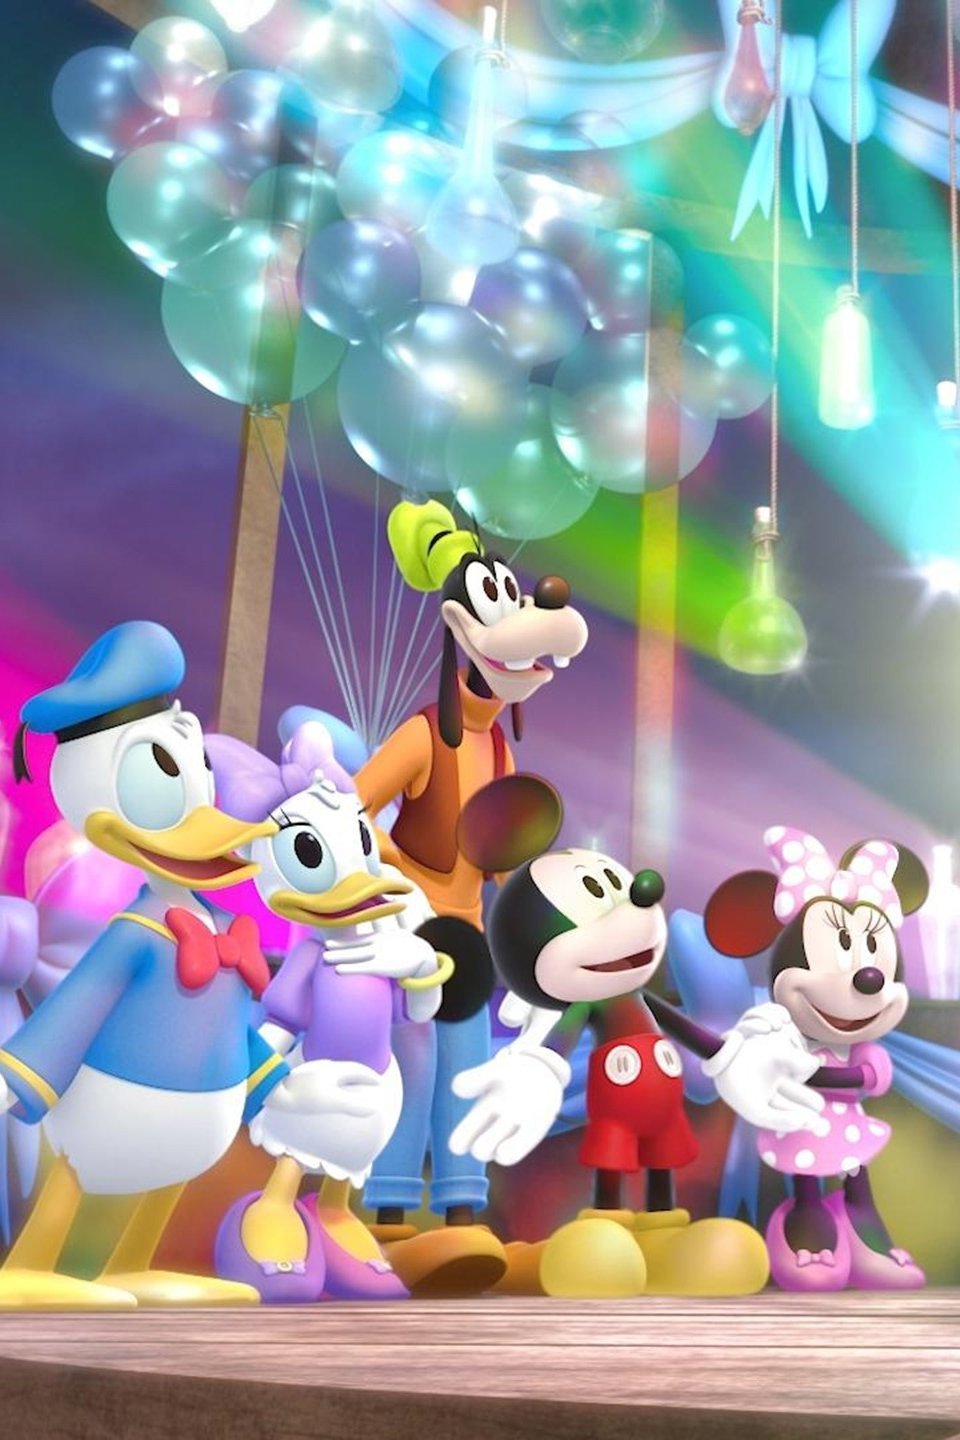 Chip 'n Dale's Nutty Tales: Mickey's Fireworks Fizzle | Season 1 | Episode 1